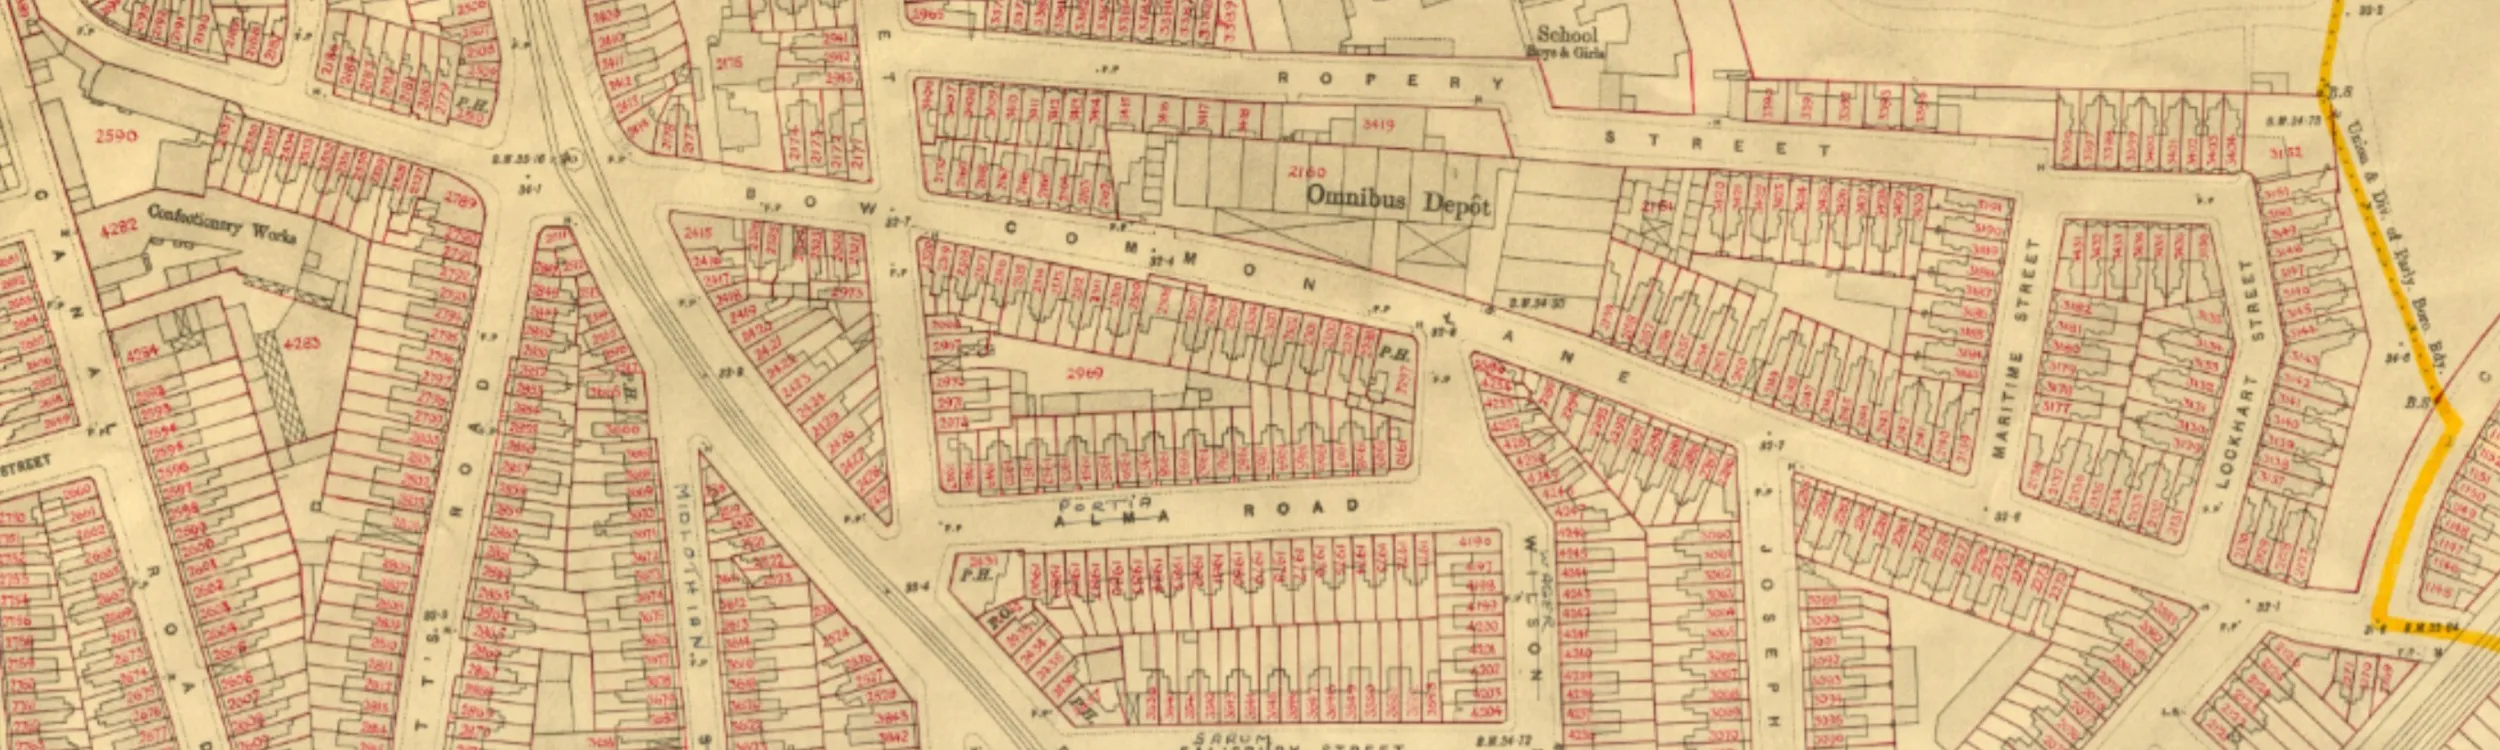 Finding your London ancestors in the 1910 Land Tax records